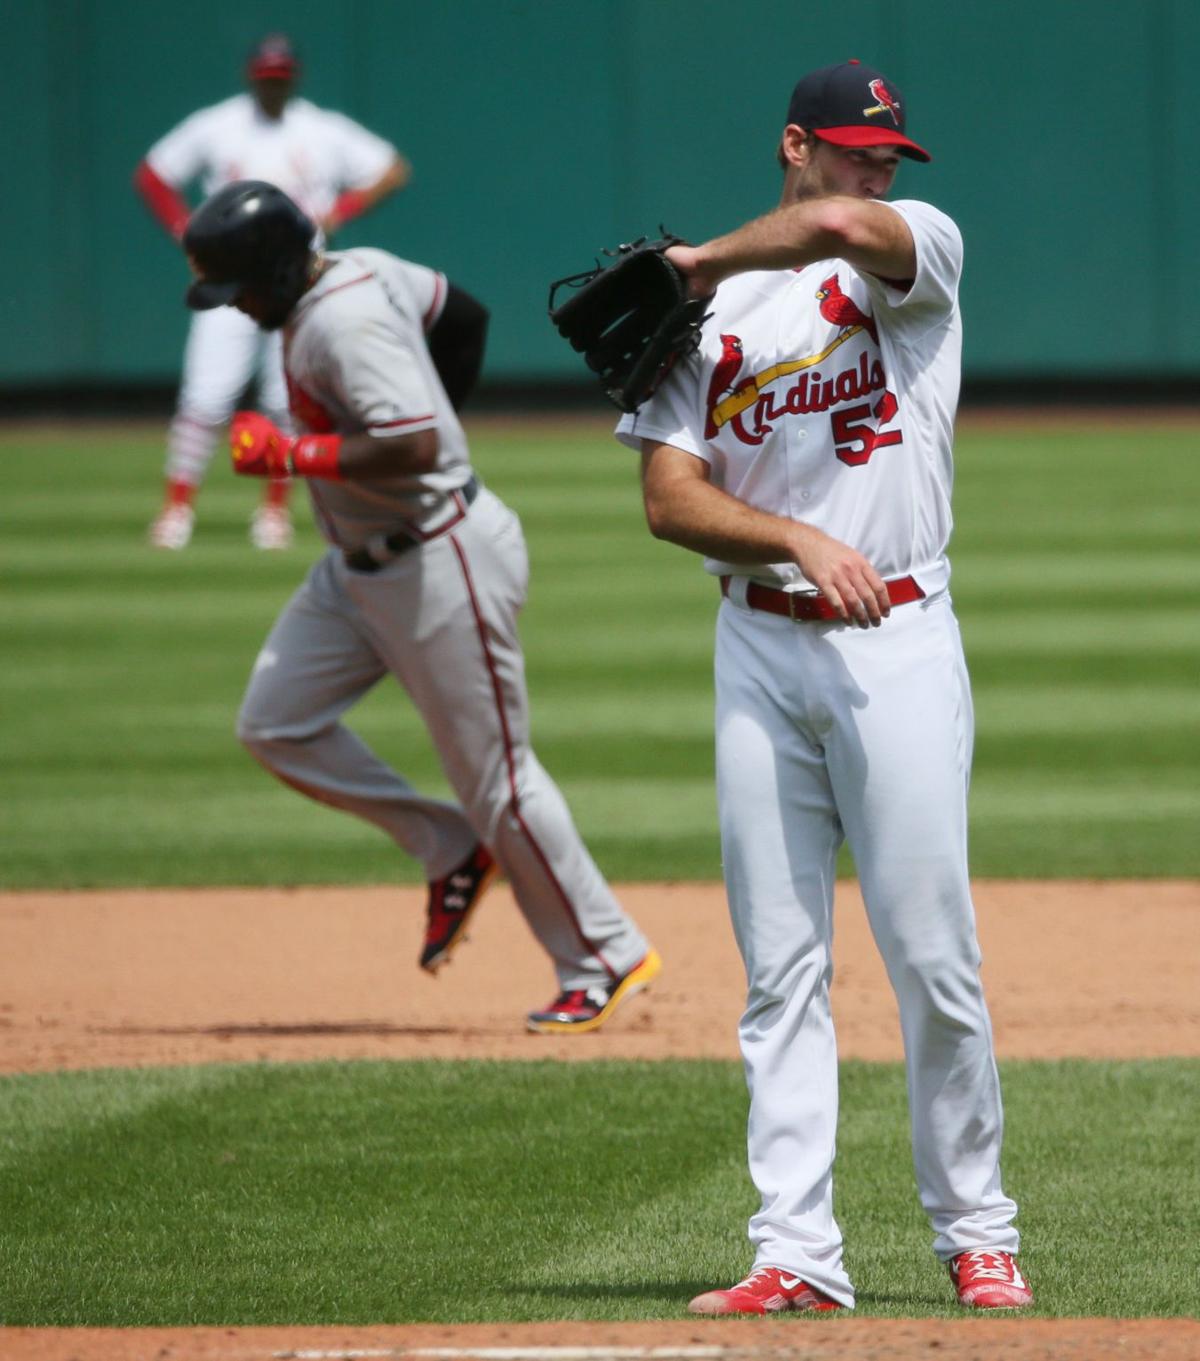 Cards end winning streak with 6-3 loss to Braves | St. Louis Cardinals | 0